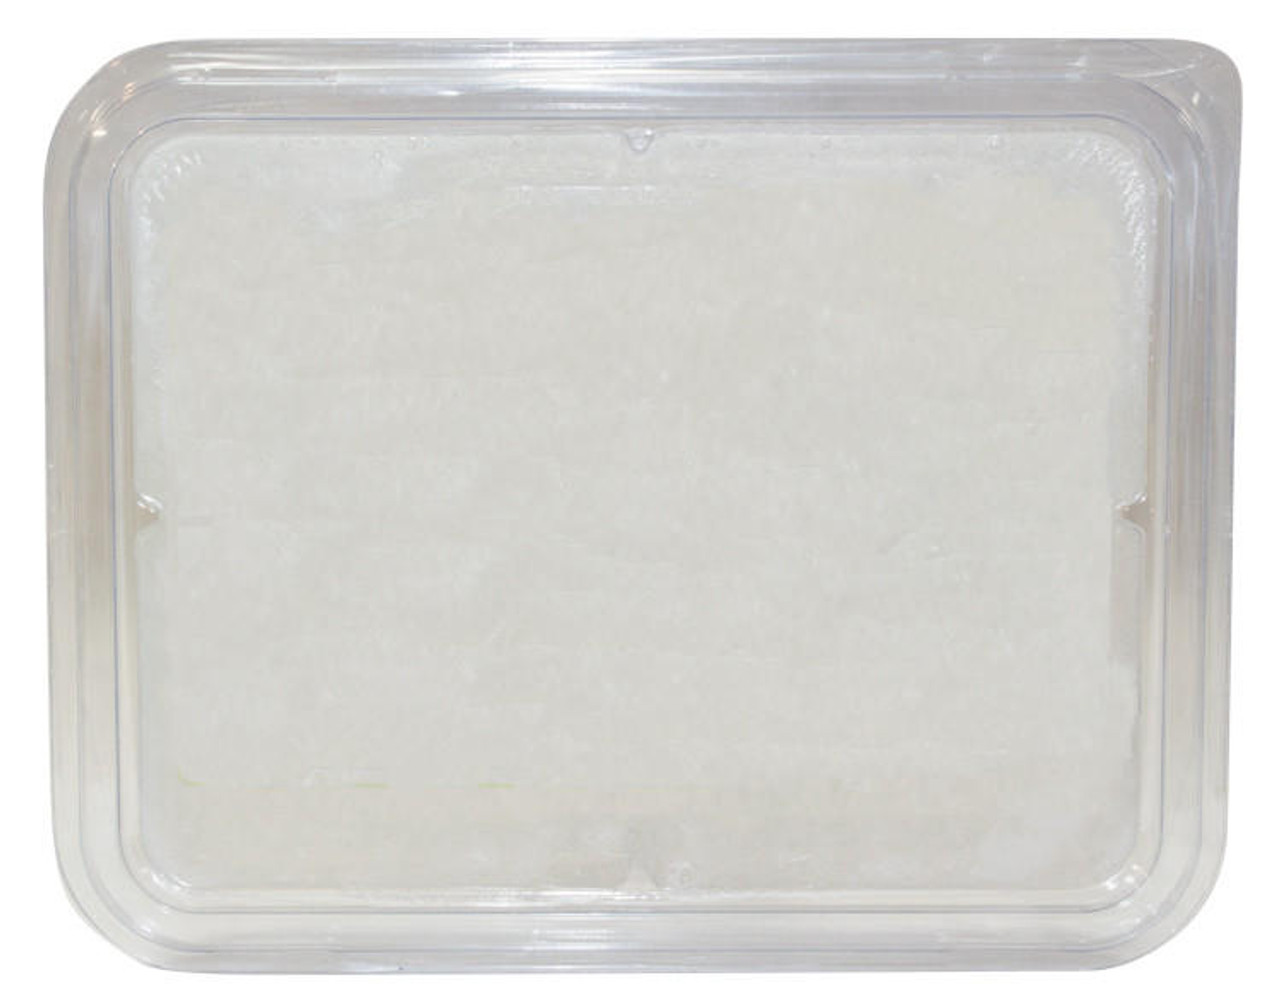 Mann Lake Bee & Ag Supply Suspend Clear Soap Base - 2 lb